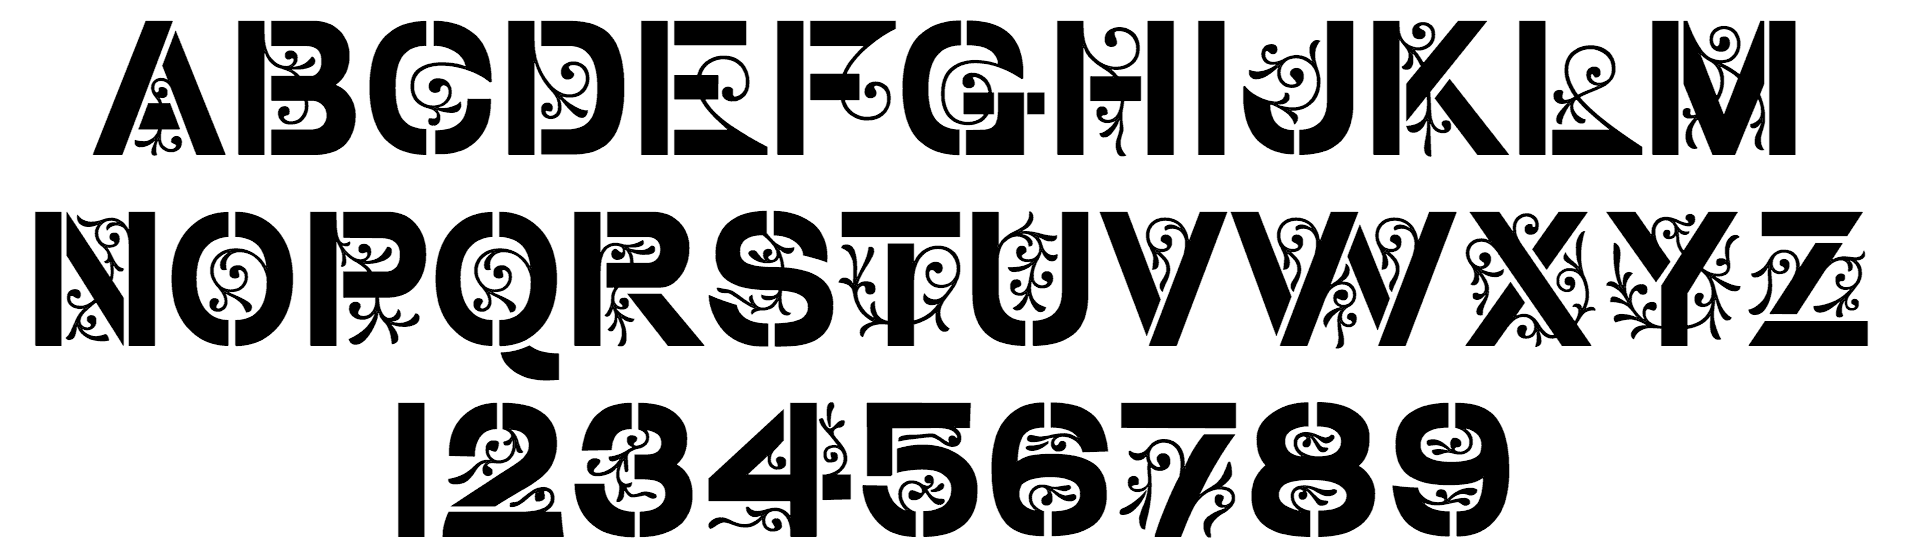 Basic character set of the typeface Stencil Gothic